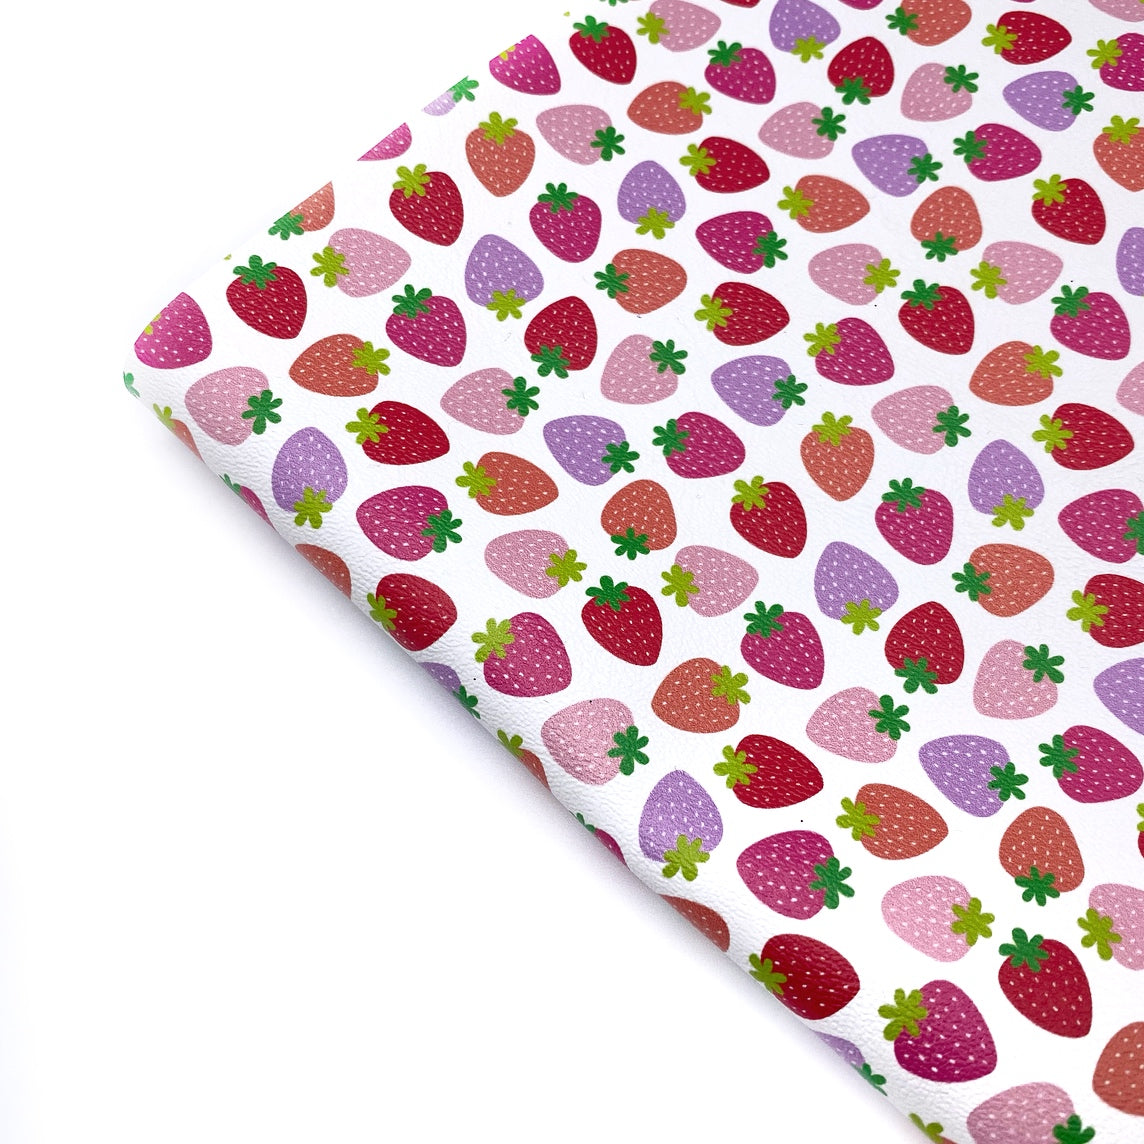 Sweetest Strawberries Premium Faux Leather Fabric Sheets